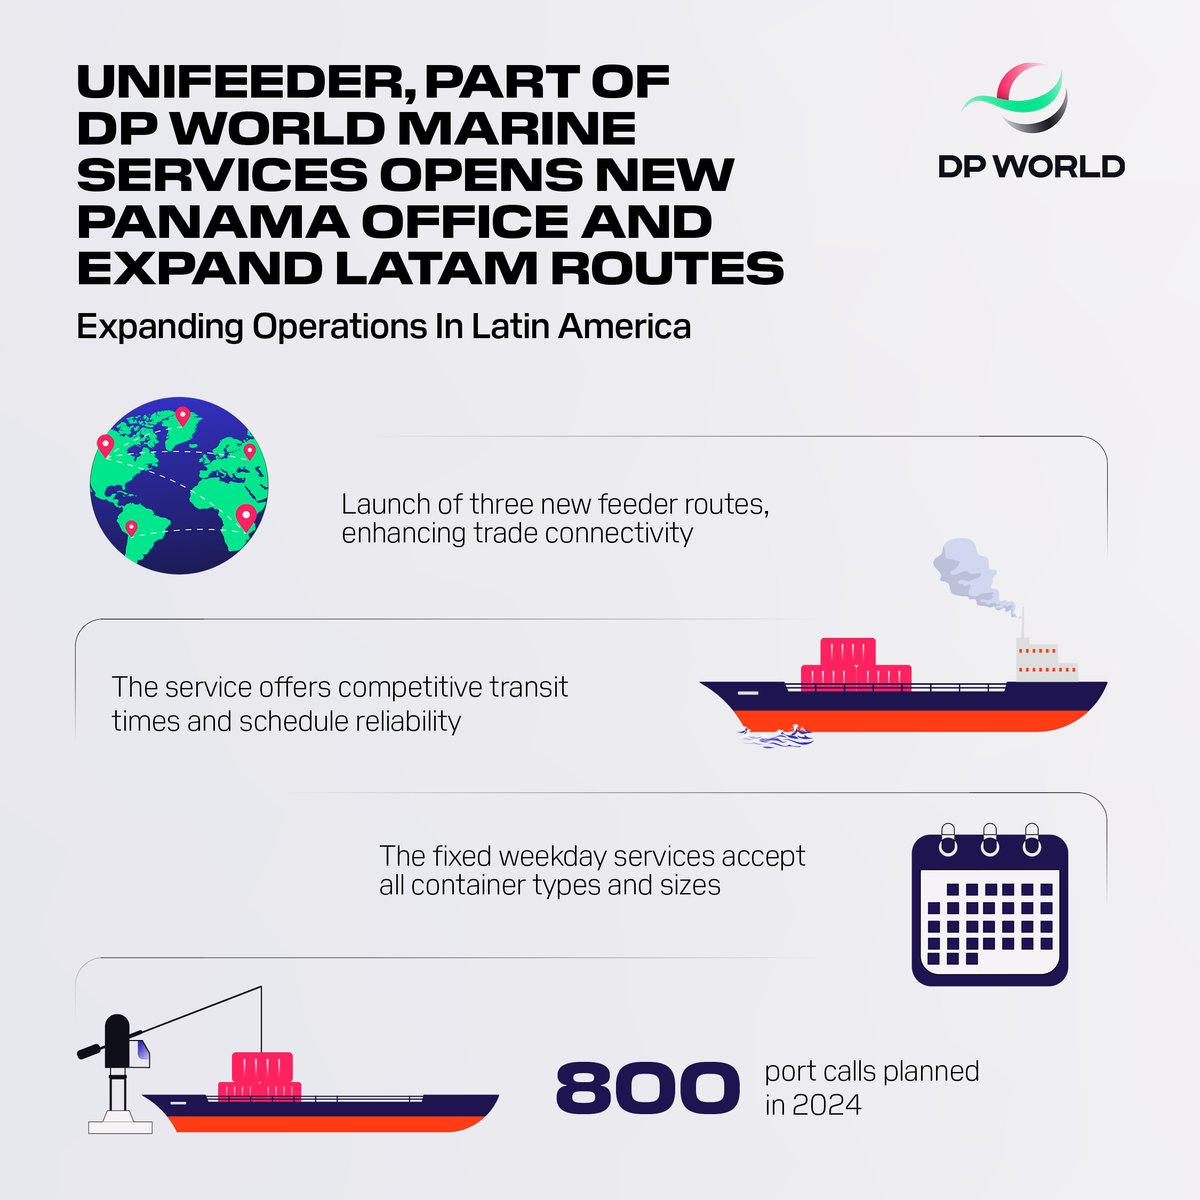 We’re opening a new office in Panama with Unifeeder alongside three direct feeder routes in Latin America. Aiming to boost trade, create jobs, and support local economies in the region – read more about our expansion here: ow.ly/nFxE50RsEGa